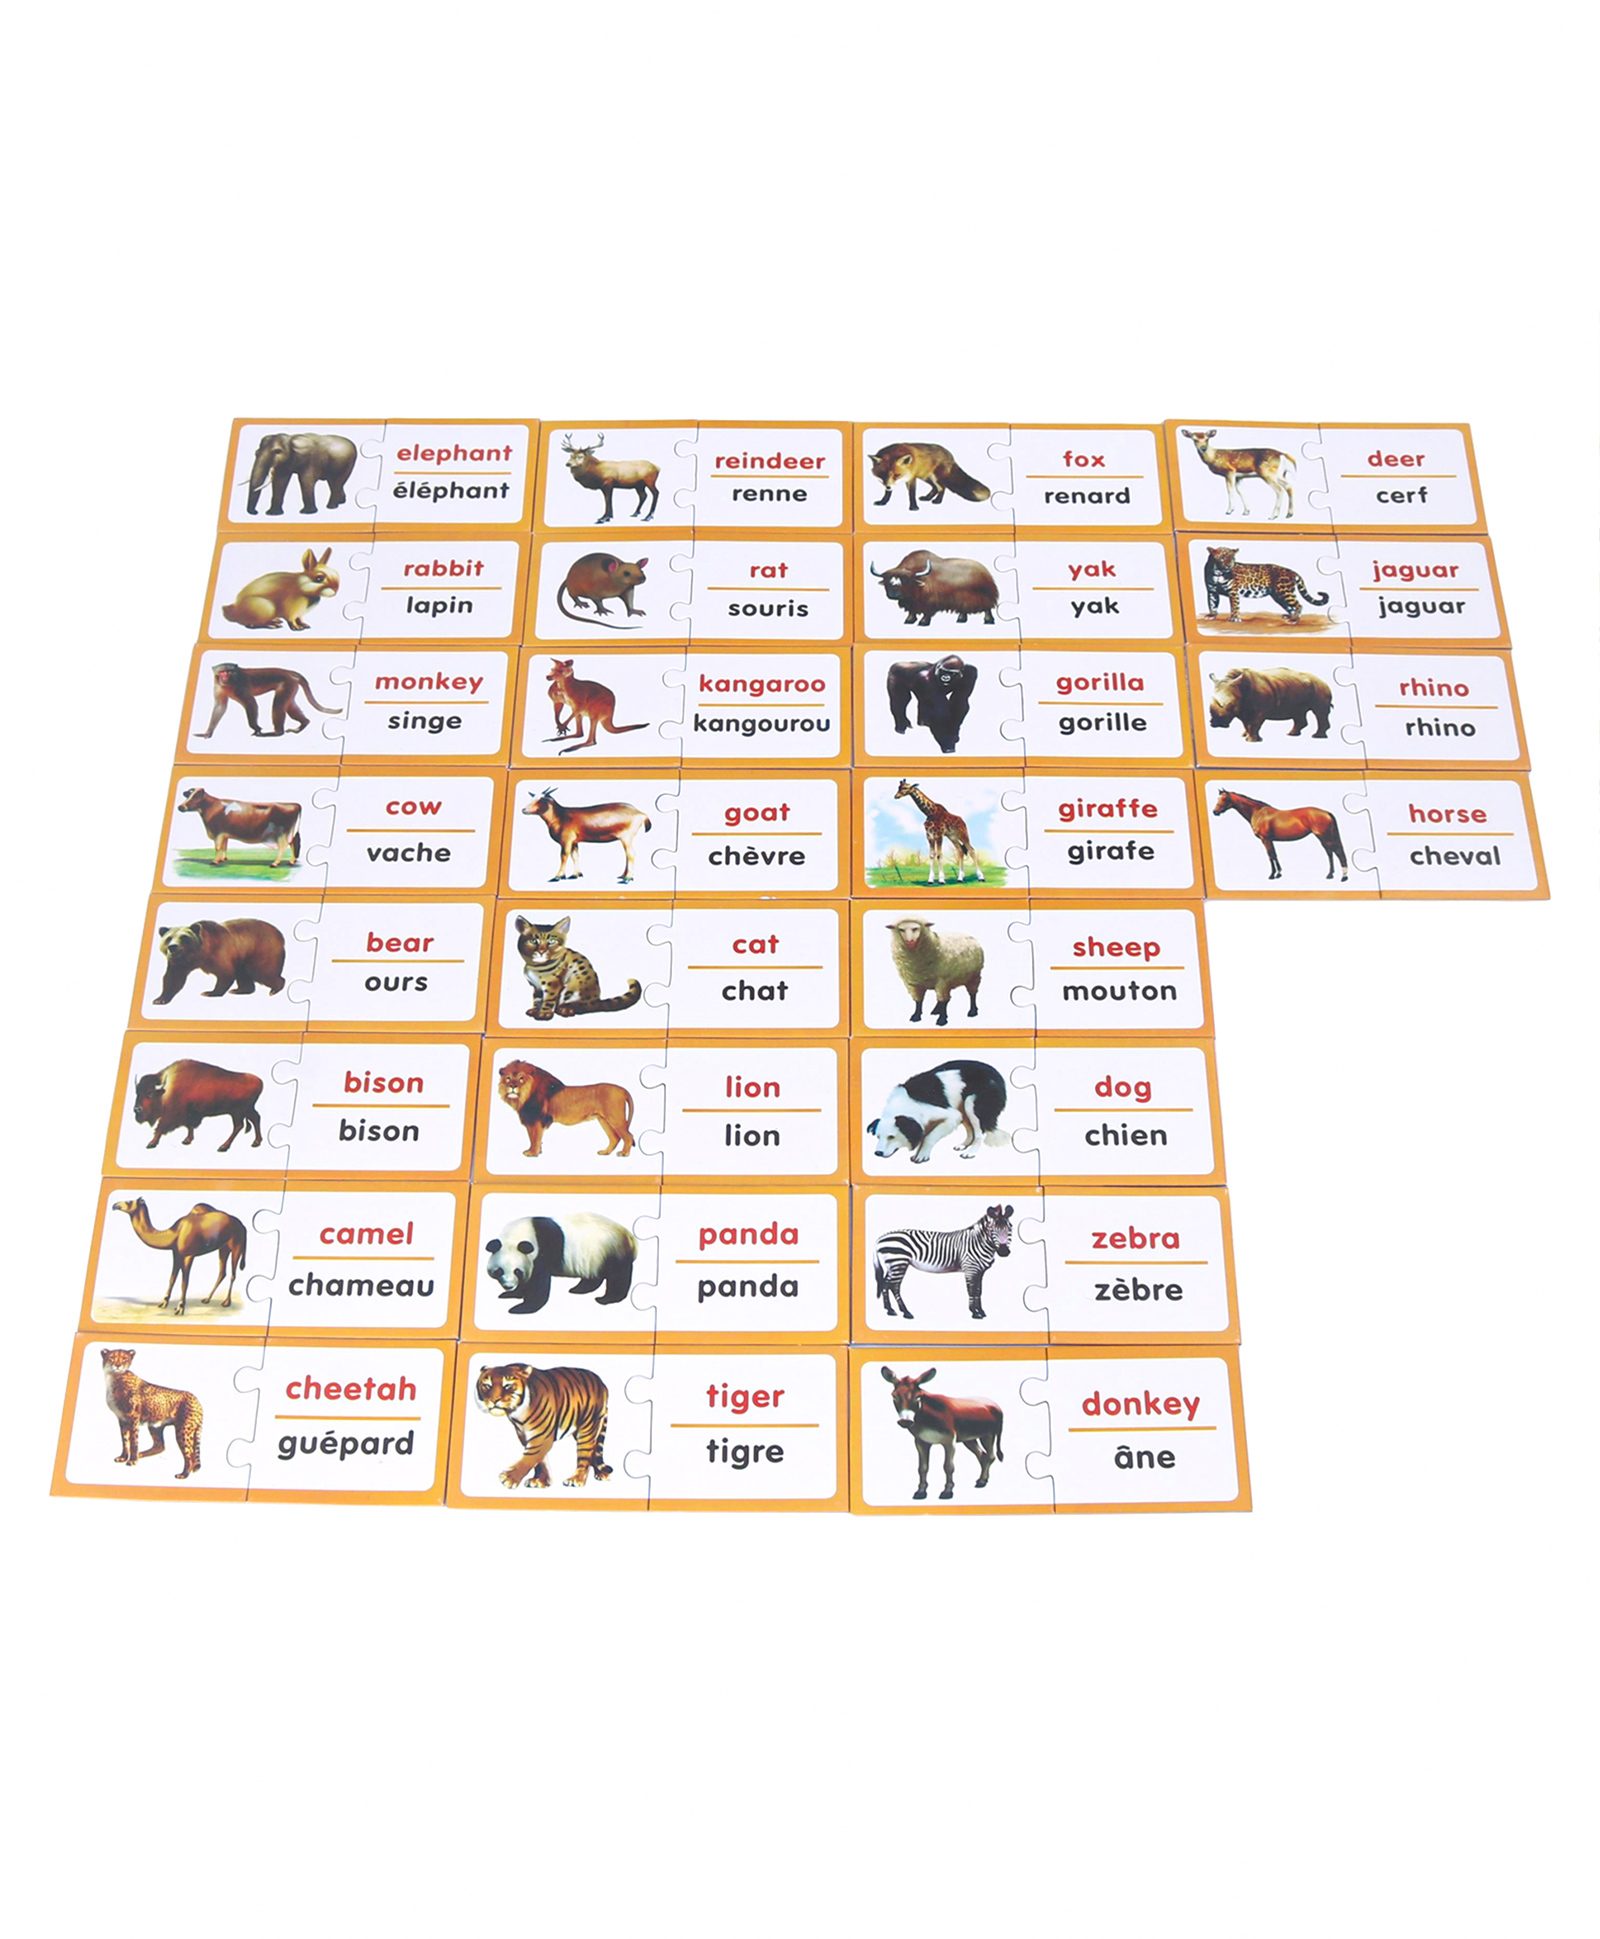 Creative Jigsaw Puzzle Learn Names Of Animals In English And French - 56  Pieces Online India, Buy Puzzle Games & Toys for (5-10 Years) at   - 11818741